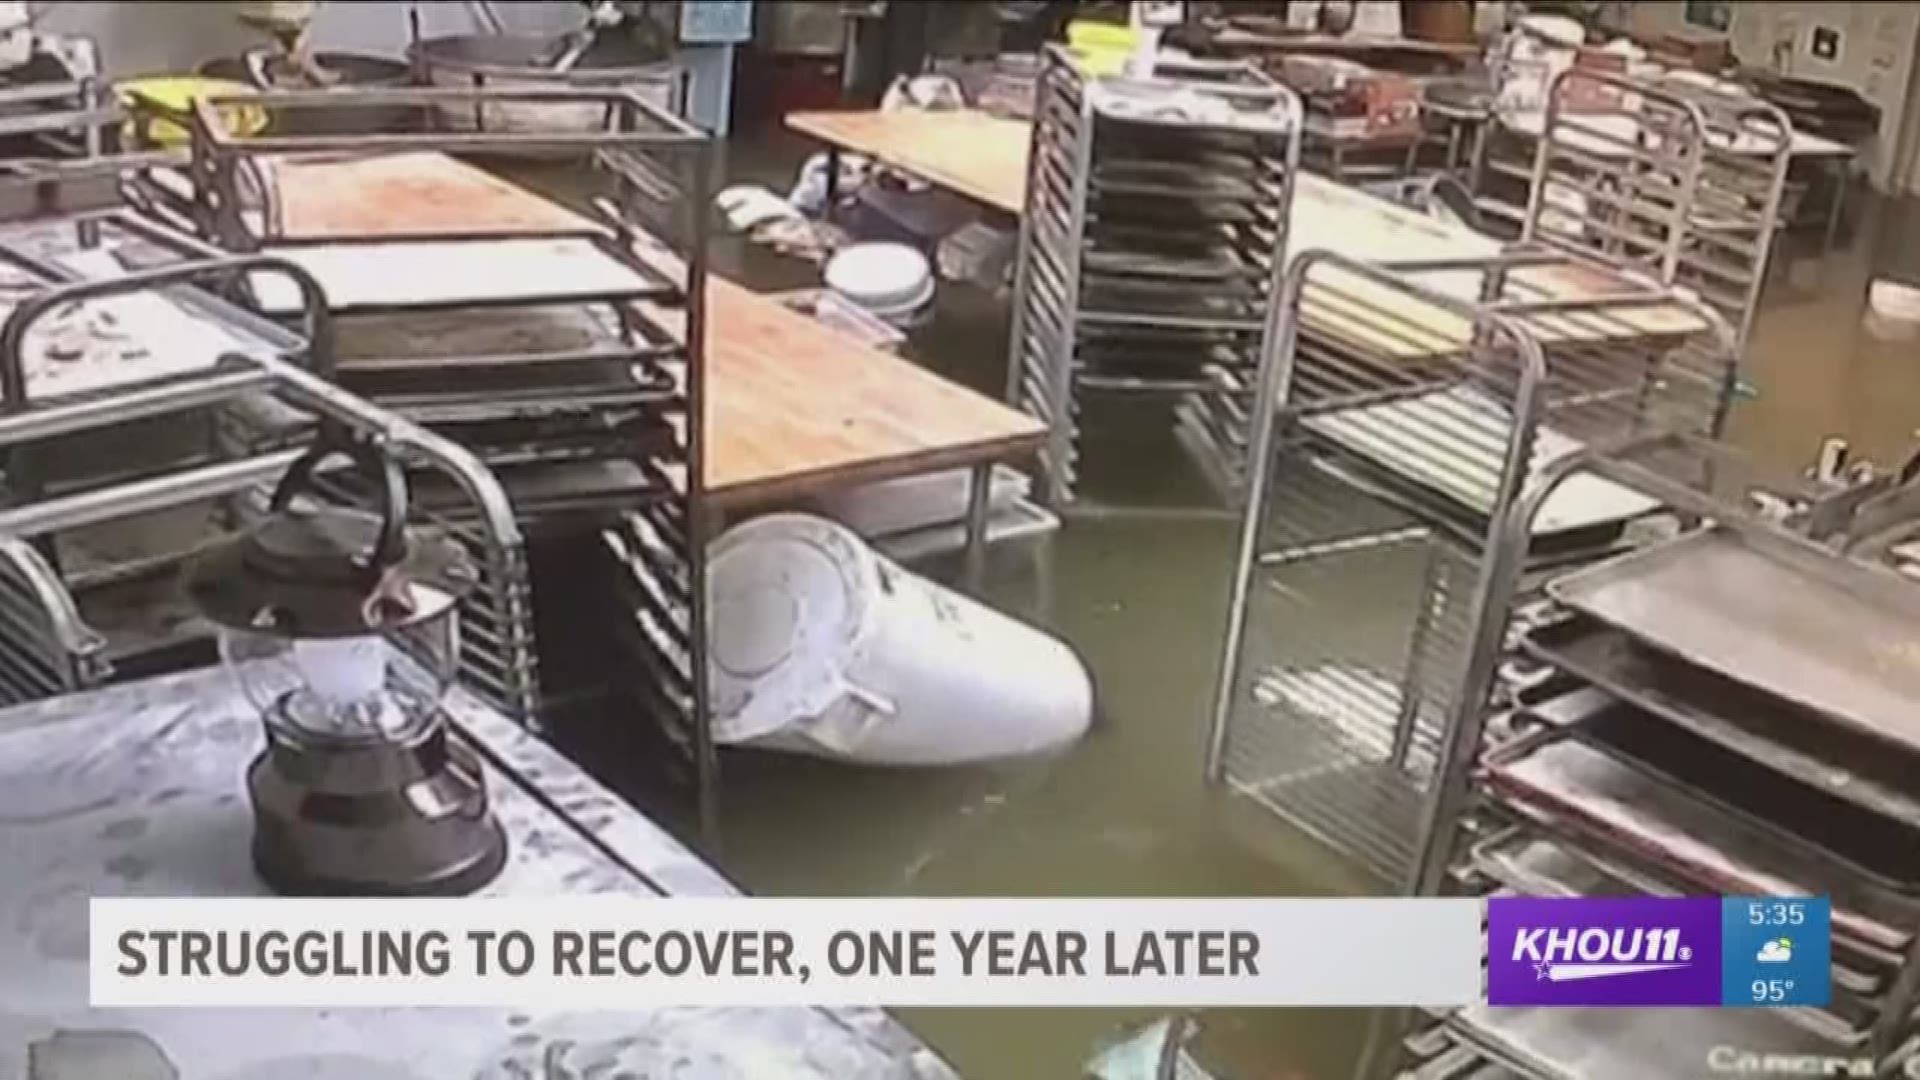 Three floods in less than three years. More than three feet of water, taking out the bakery which raced to re-open about three weeks after Harvey.

